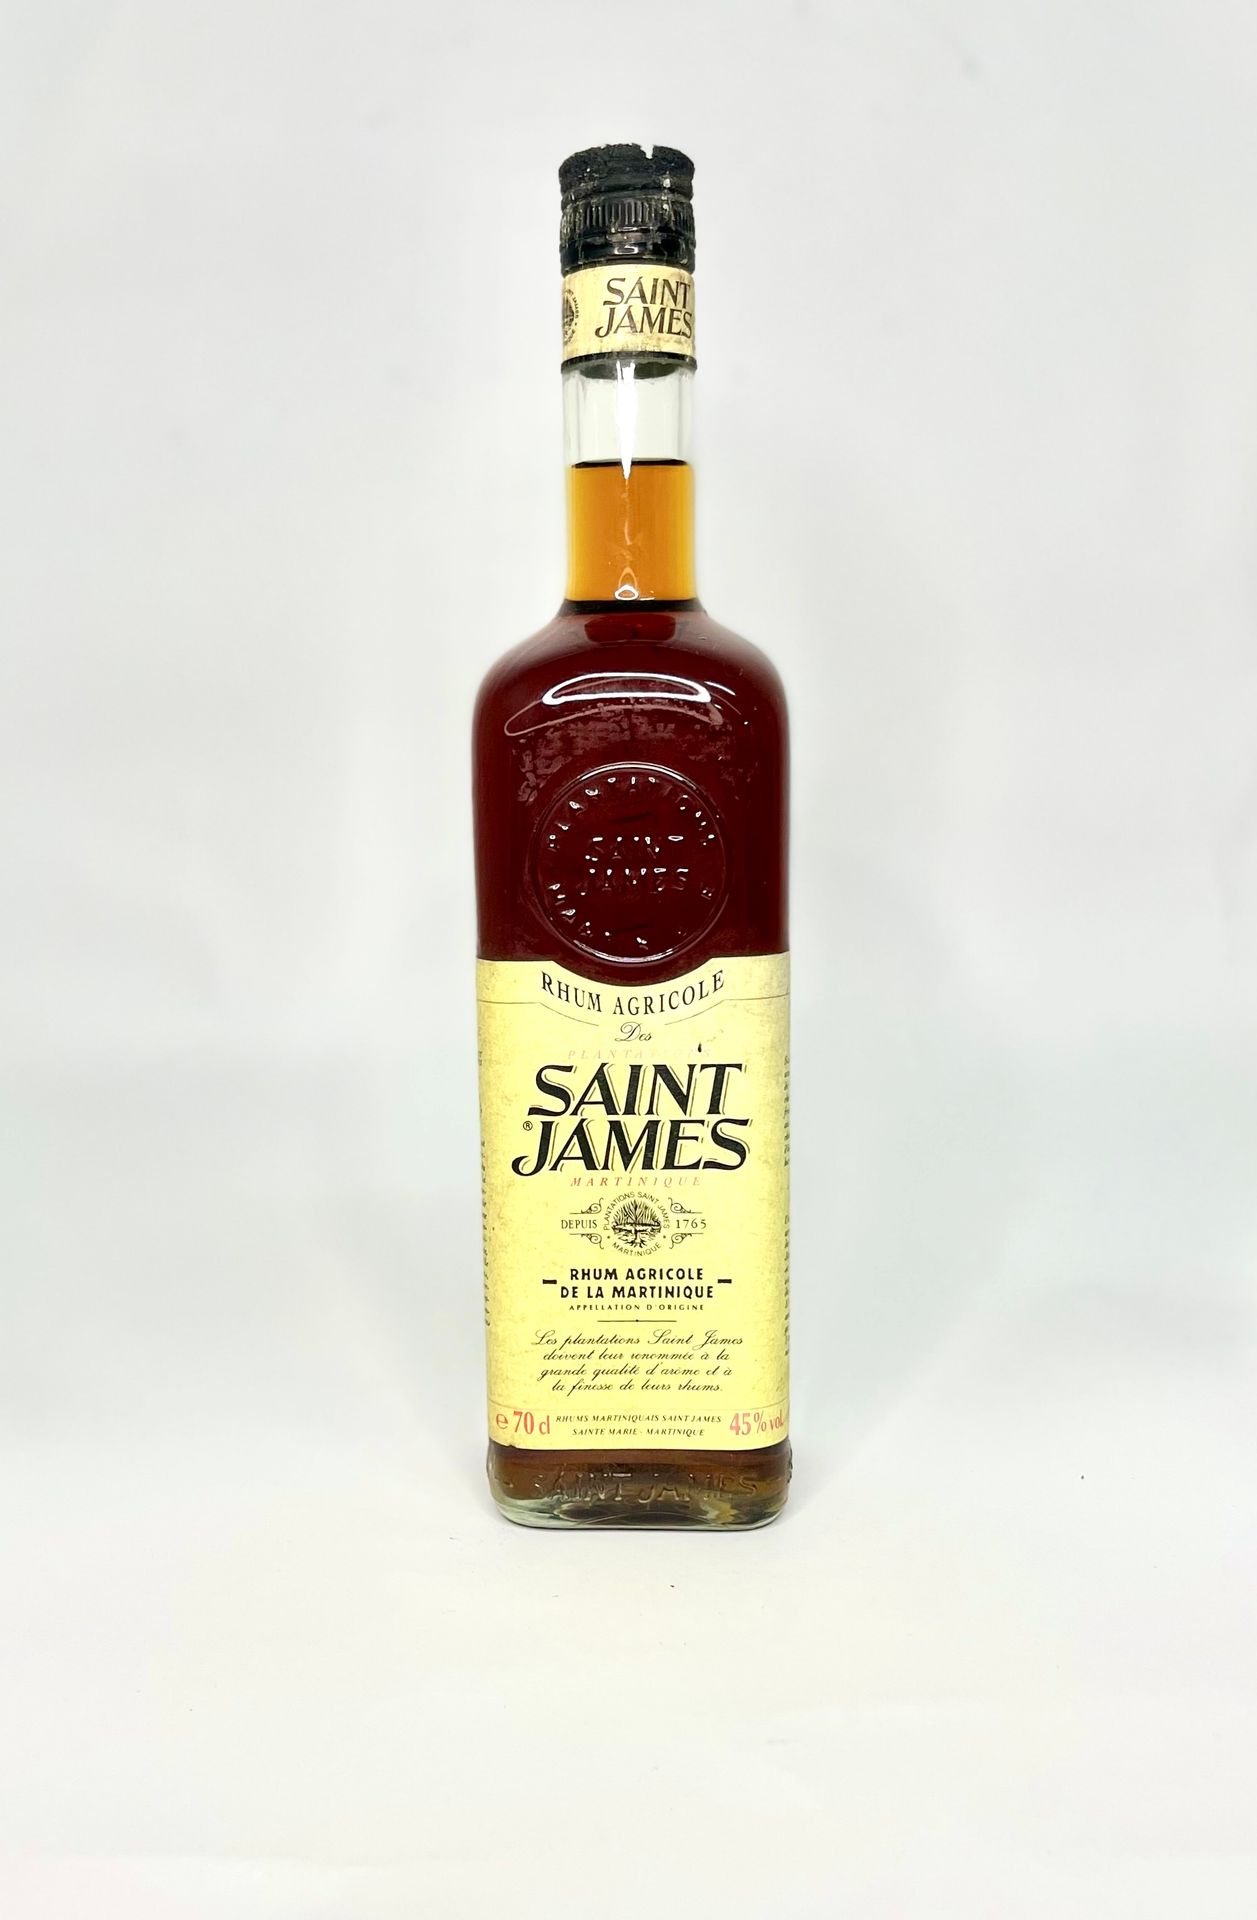 Null PLANTATIONS SAINT JAMES

Old agricultural rum 45°, Martinique AOC.

70 cl.